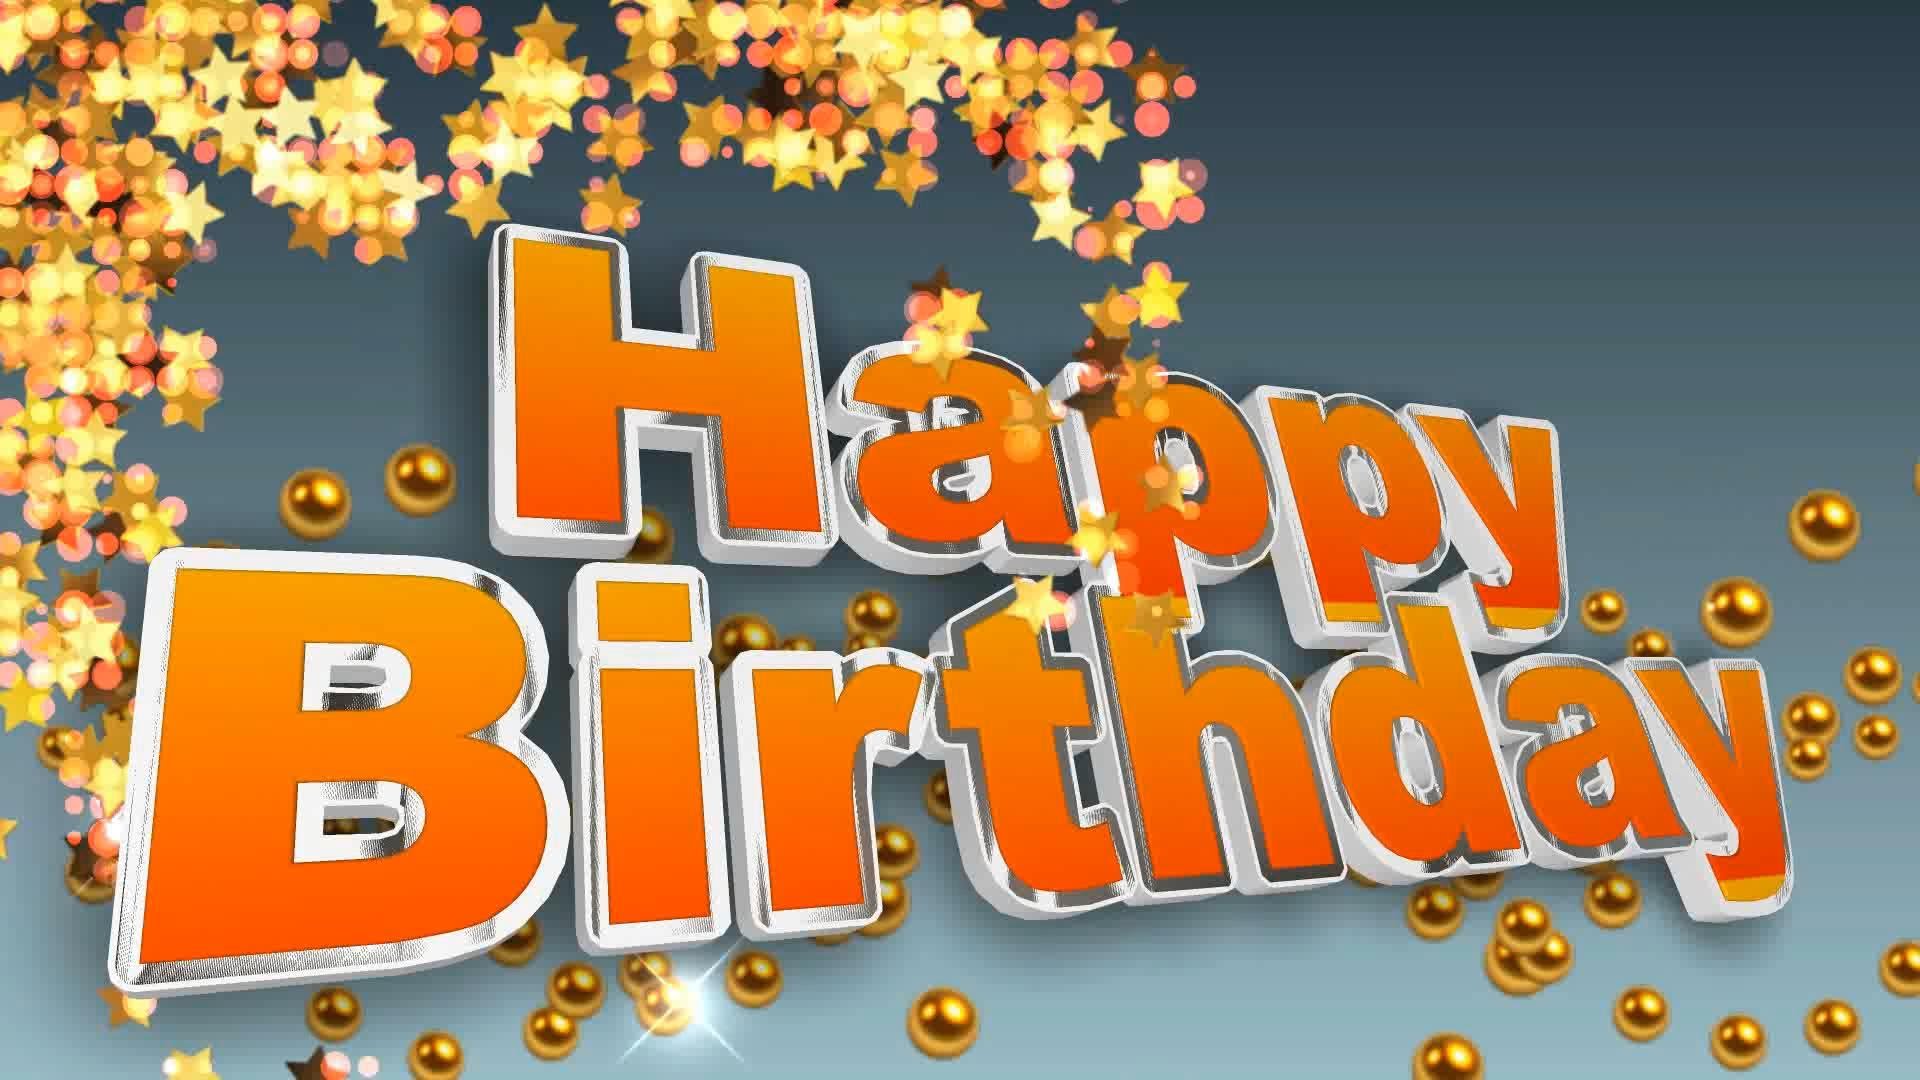 Happy Birthday Images Orange - Animated Birthday Images For Brother - HD Wallpaper 